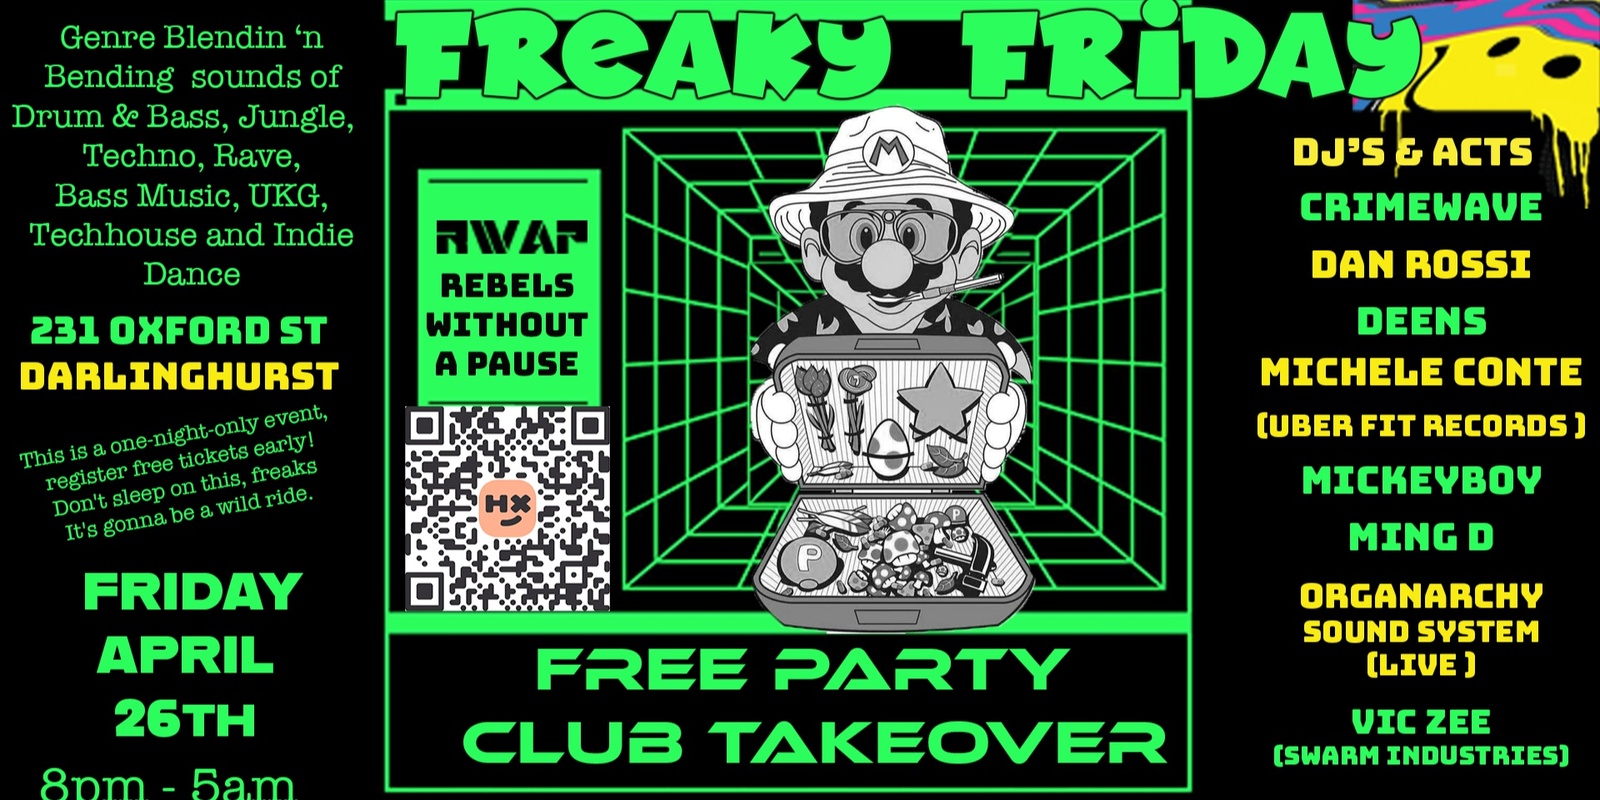 Banner image for Freaky Friday - Free Party Club Take Over 